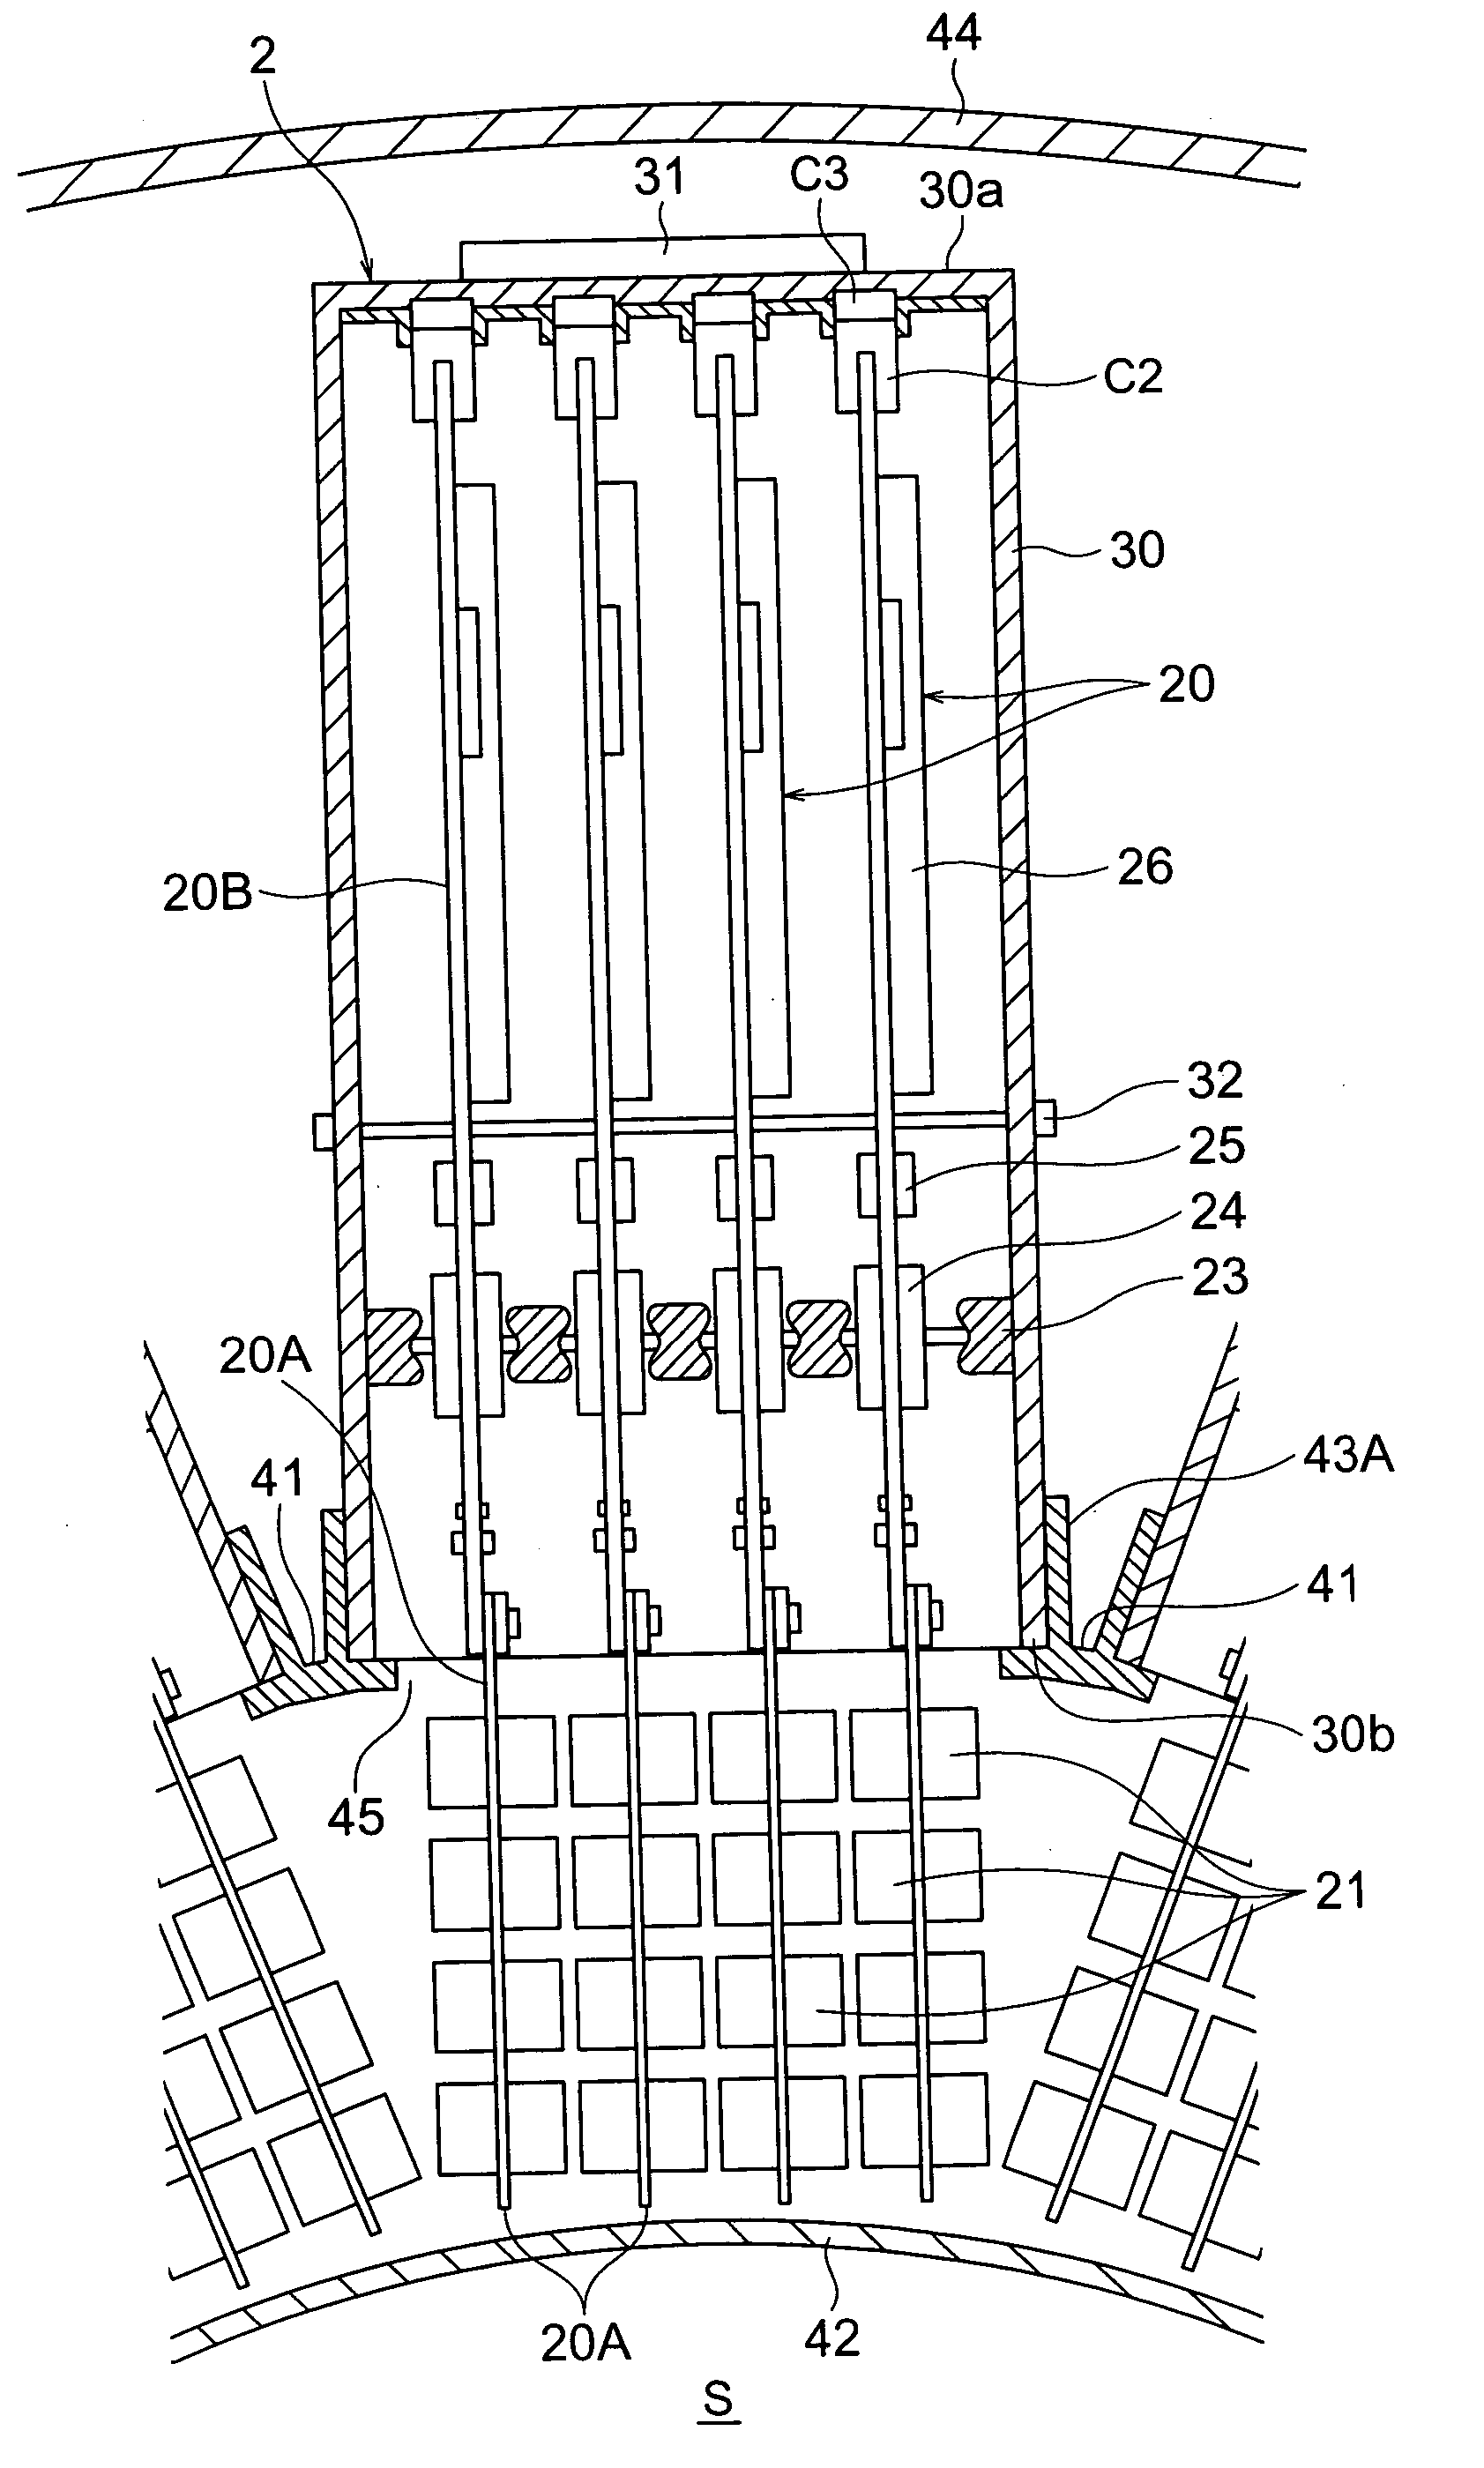 Radiological imaging apparatus and its detector unit